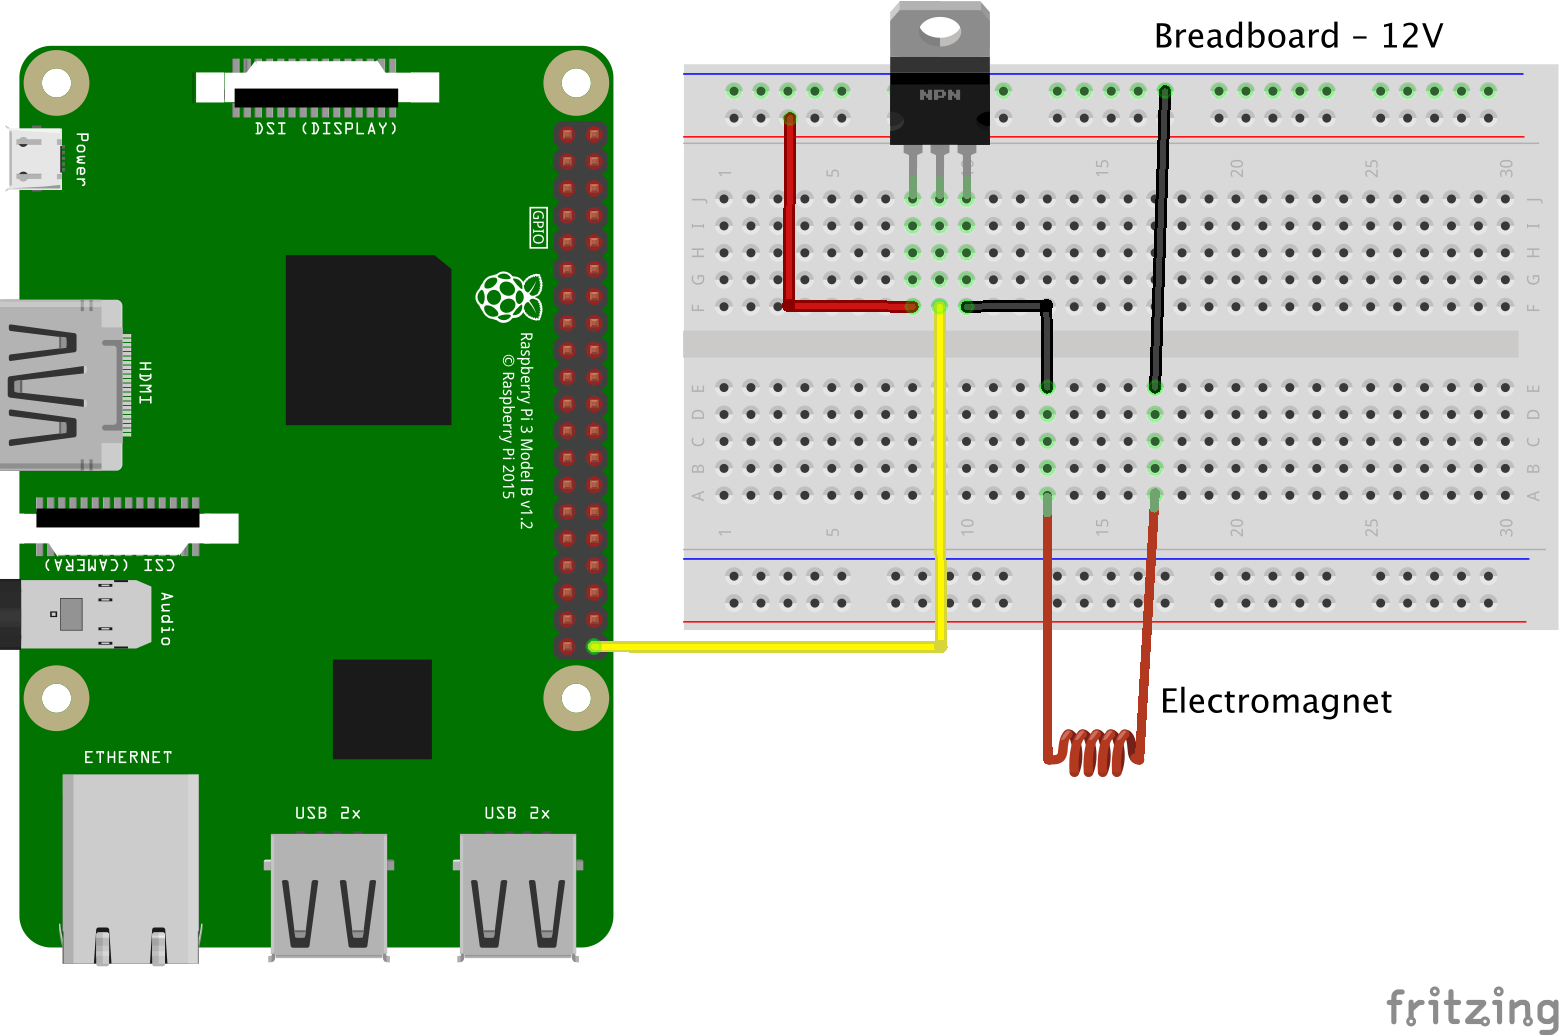 Circuit diagram of the electromagnet connected to the Raspberry Pi.